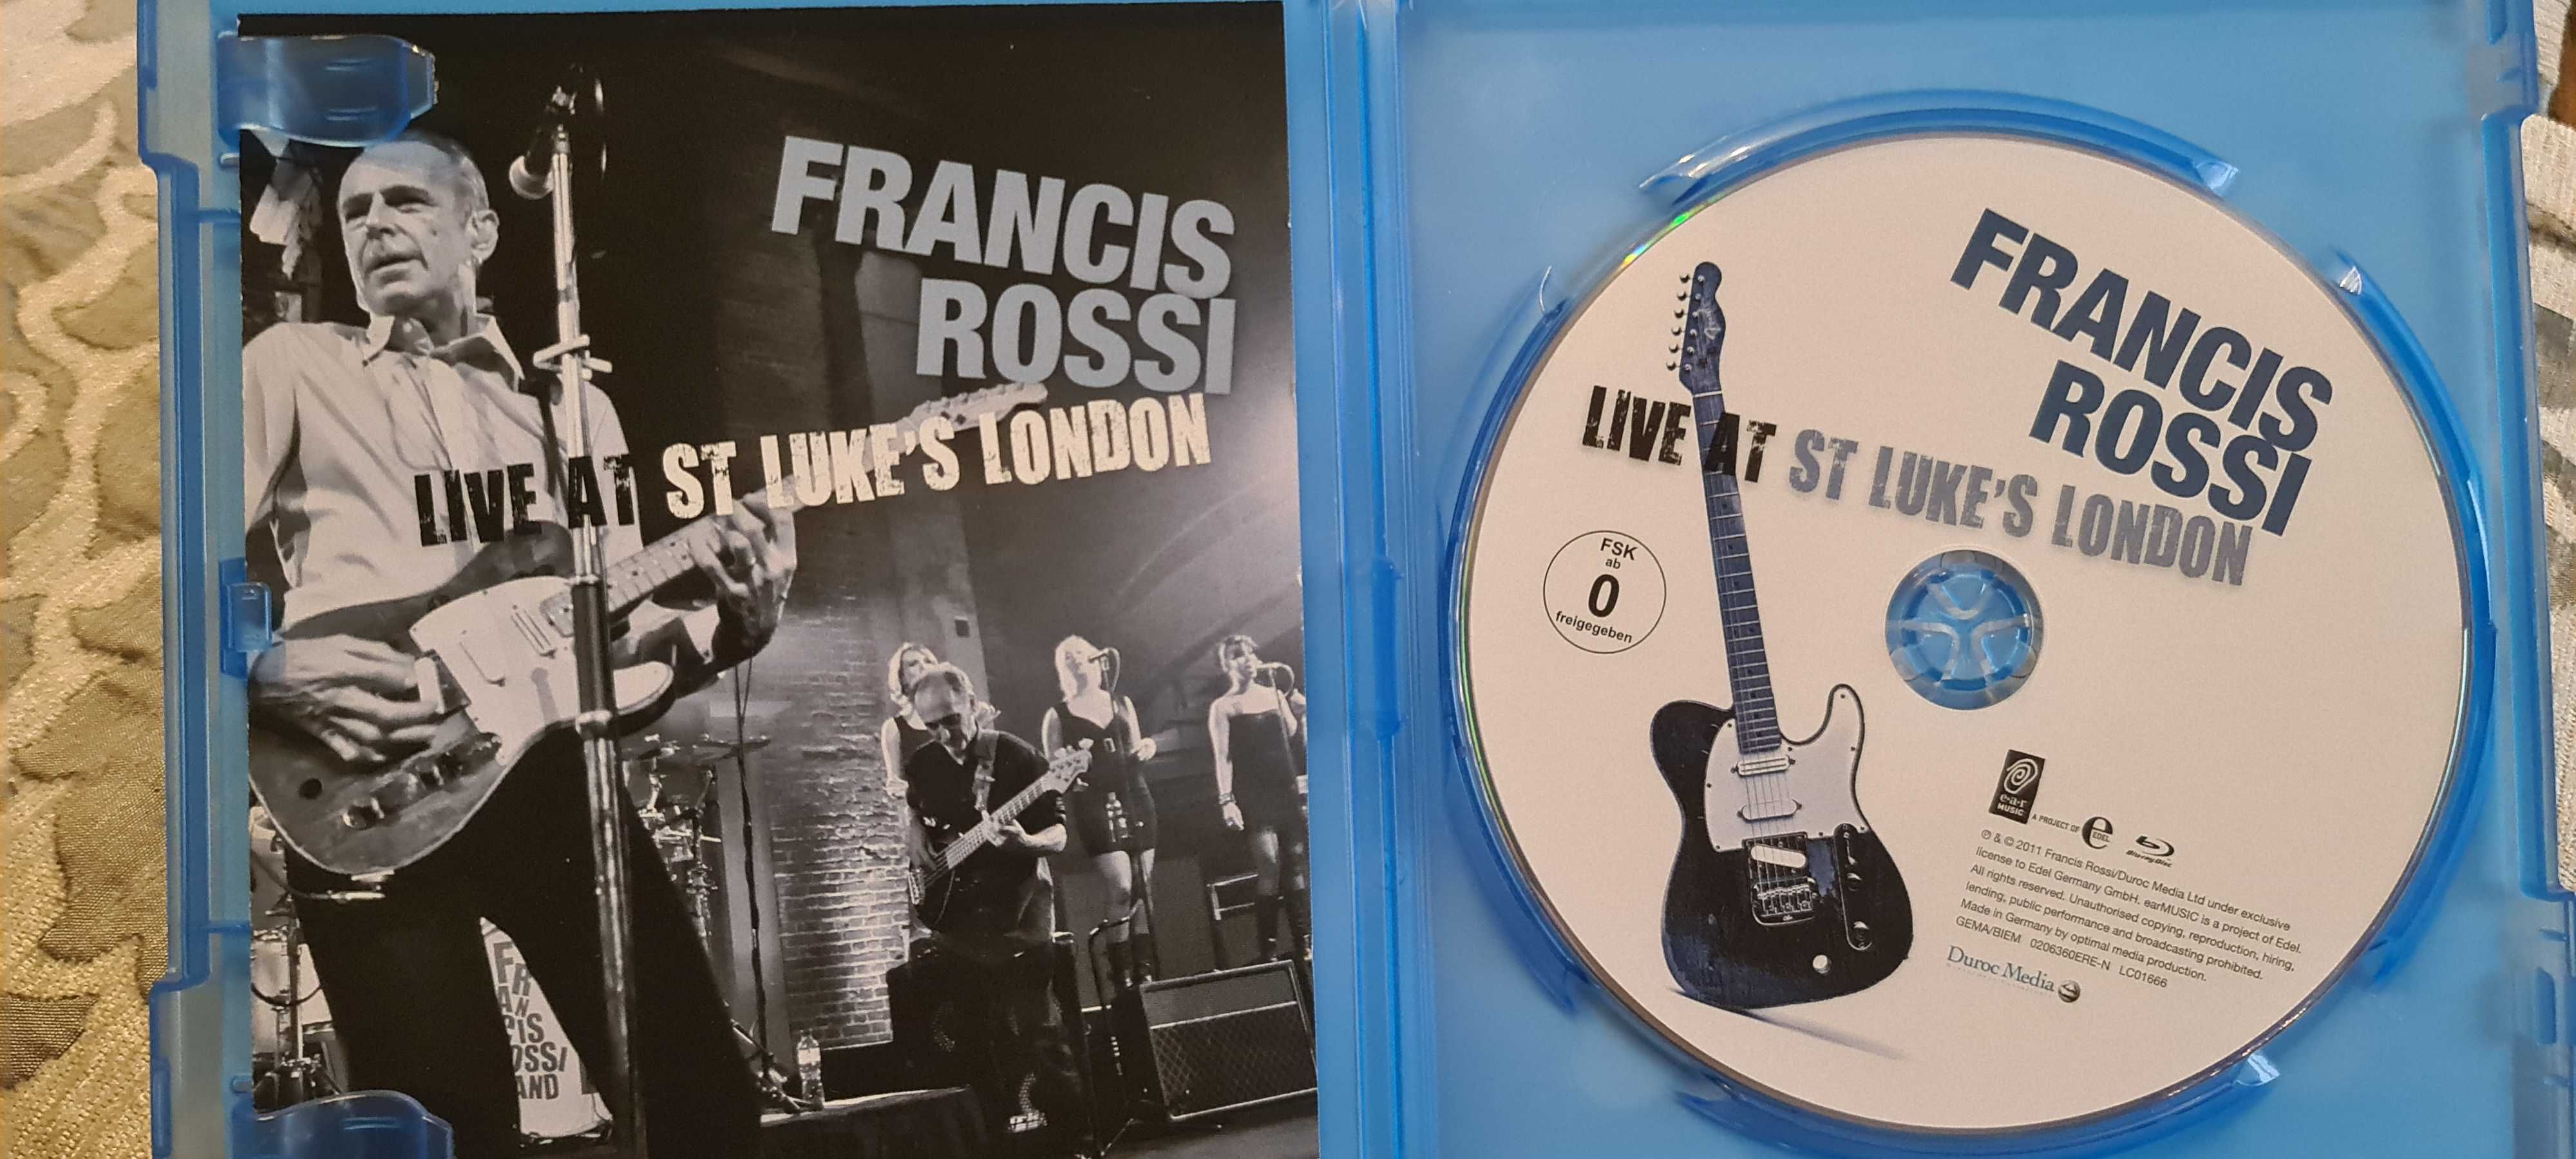 Francis Rossi Live At St Luke'S London, Blu-ray